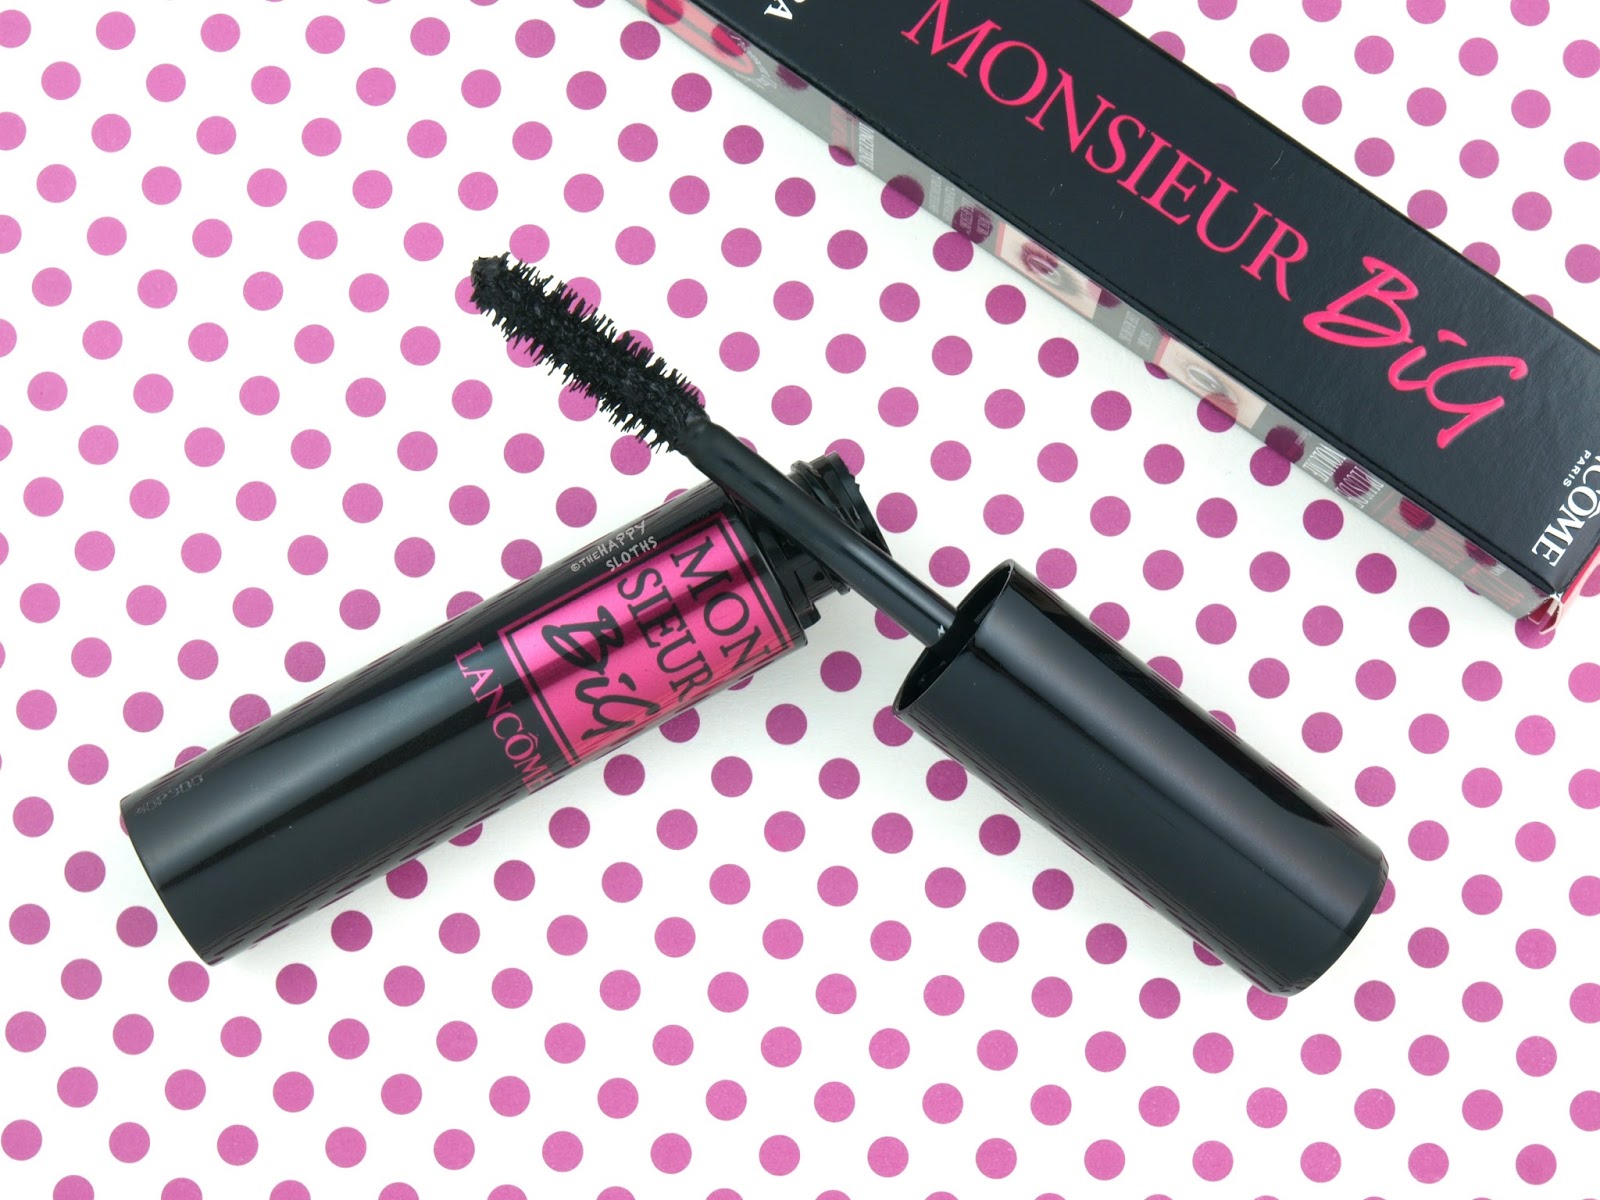 Lancome Monsieur Big Mascara: Review and Swatches